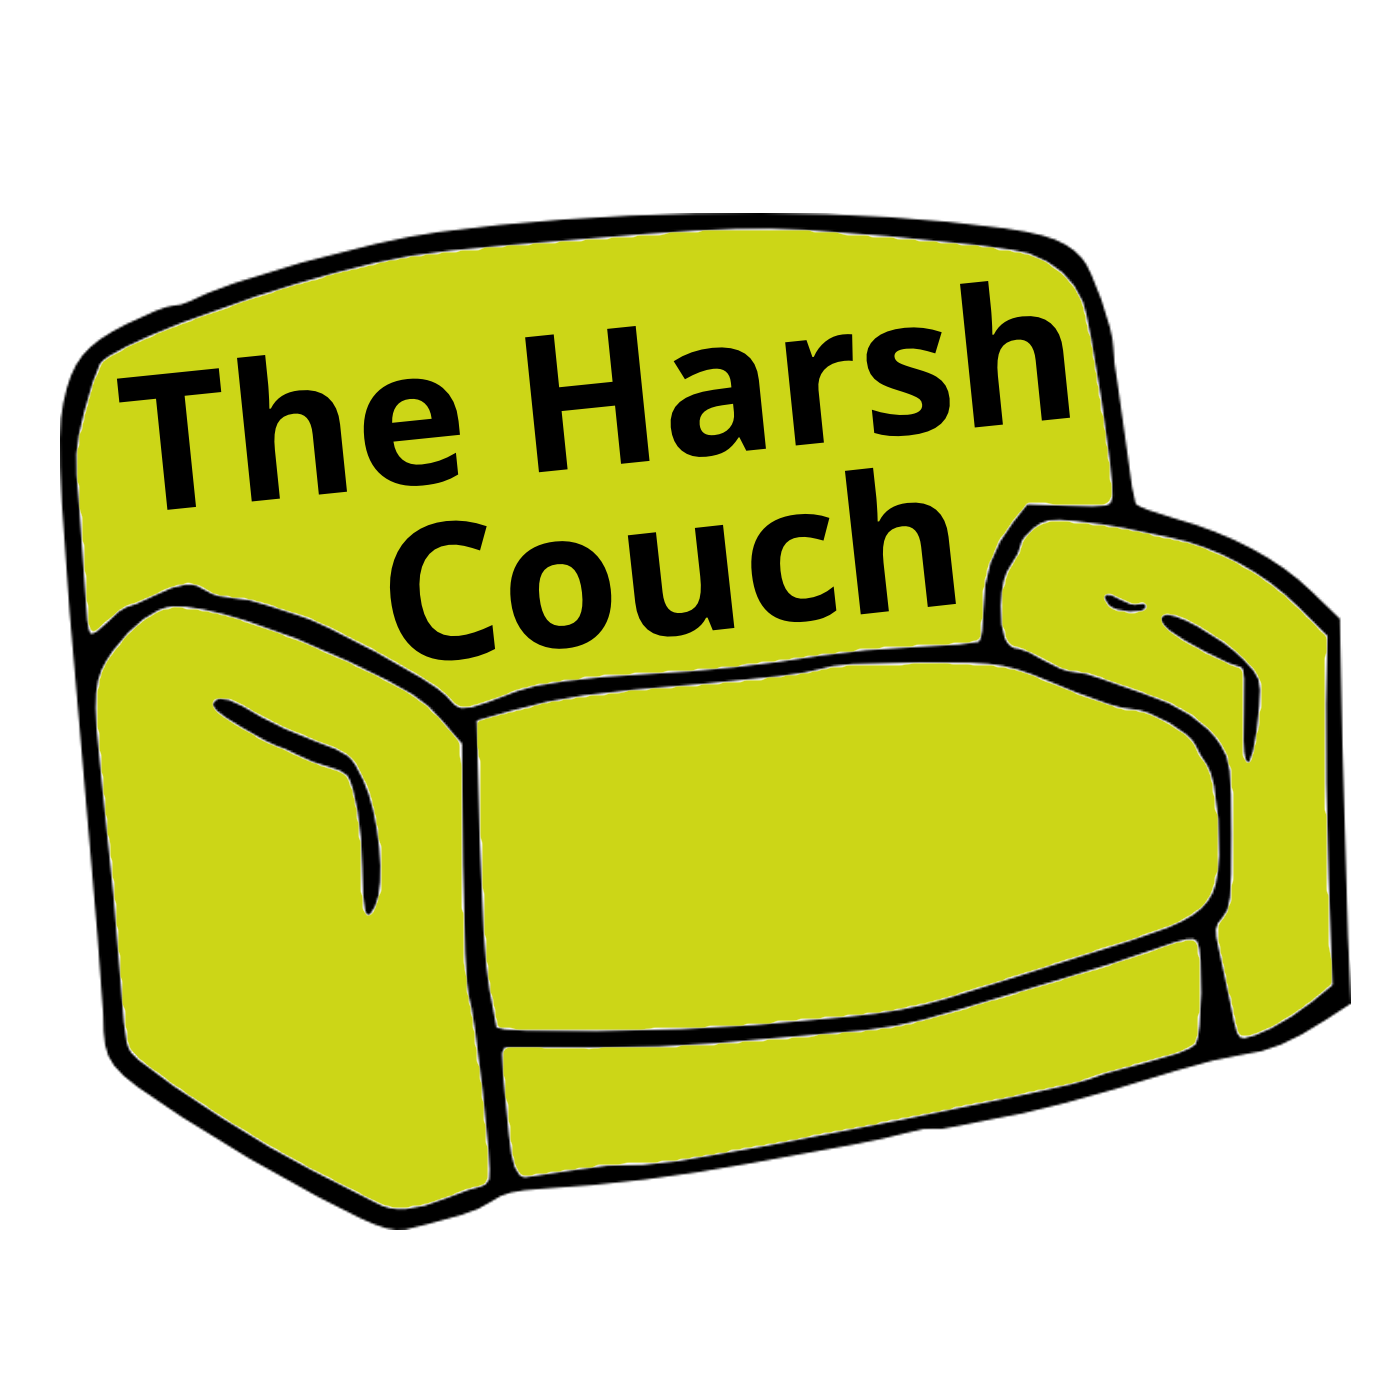 The Harsh Couch